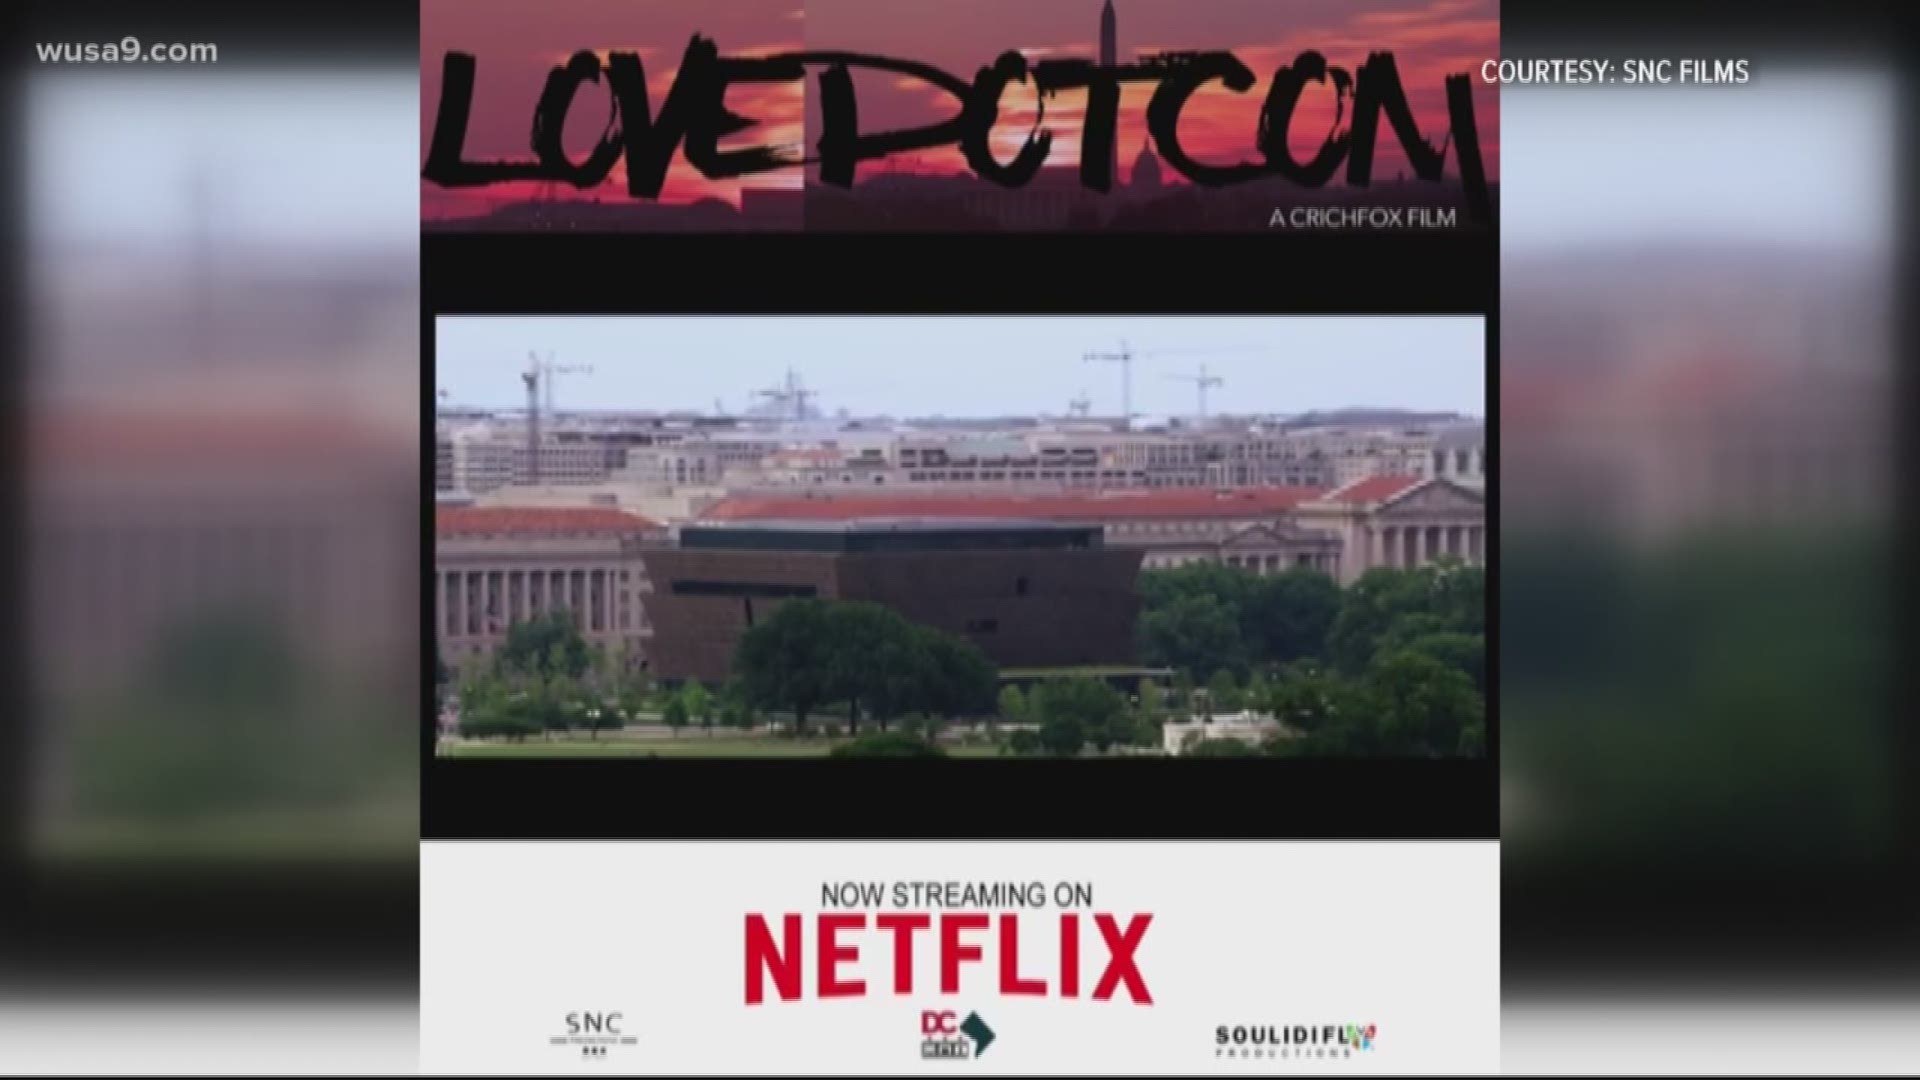 One of Netflix's newest movies is shining a bright light on the District. "Love Dot Com: The Social Experiment" is a D.C.-based romantic comedy currently trending.